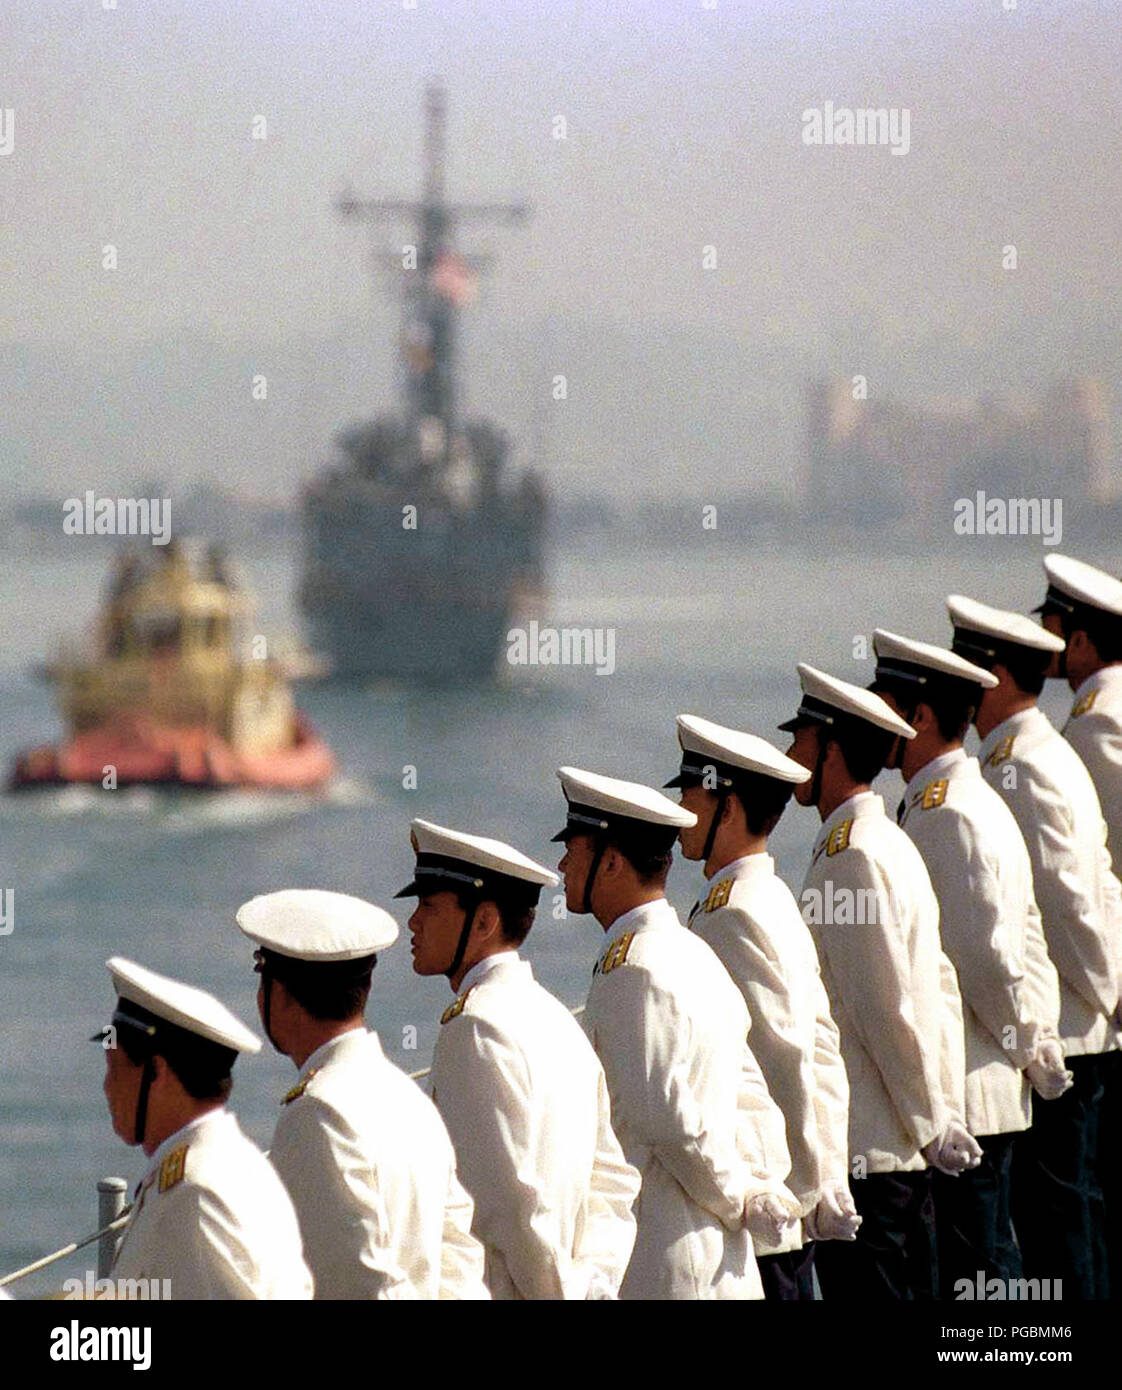 Chinese officers man the rail as the U.S. Navy frigate USS GEORGE PHILLIP (FFG 12) (Out of focus in the background) escorts the Republic of China (Navy) Luhu Class Destroyer, HARIBING (DDG 112), into San Diego Bay. This marks the first time Chinese warships have crossed the Pacific and visited the Continental United States.  The destroyer HARIBING, Luda II Class Destroyer, ZHUHAI (DDG 166), and a supply ship, the Fusu Class, NANYUN (AOR/AK 953), (ZHUHAI and NANYUN not shown) stopped at Naval Station, North Island, San Diego, California, on March 21st, 1997. Stock Photo